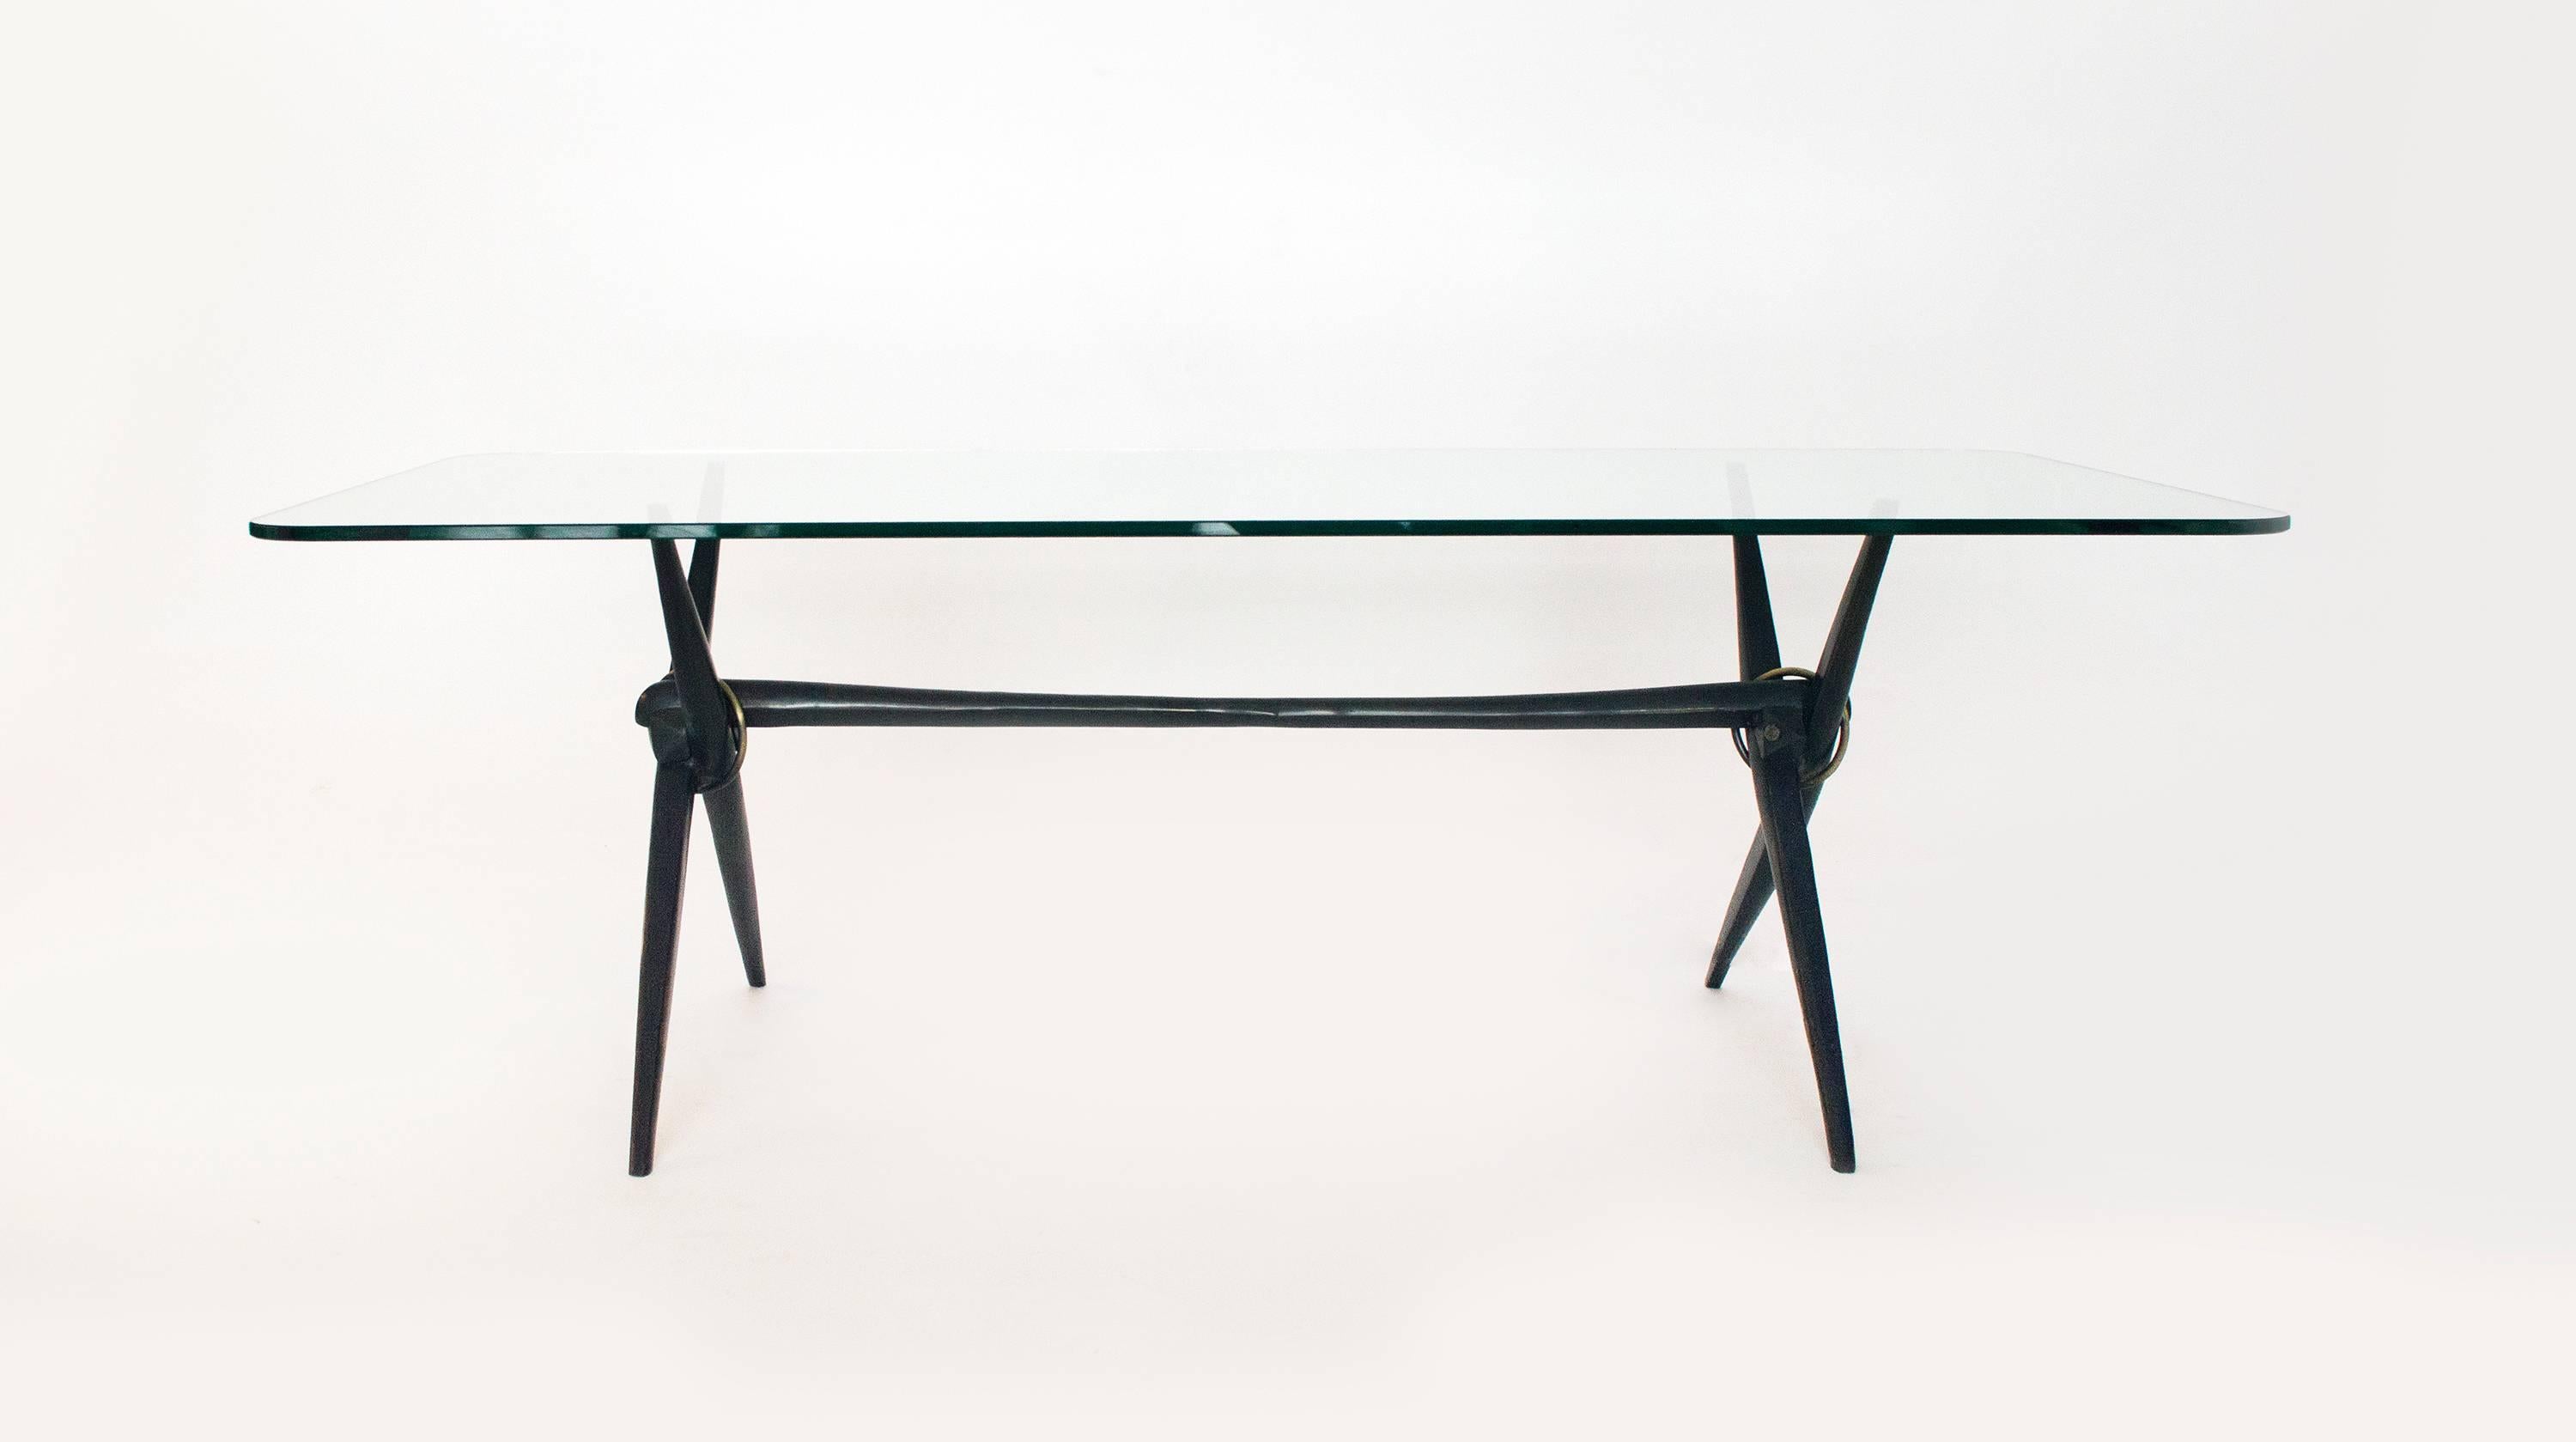 Being cast in solid bronze, this table stands apart from your typical table. It works well as a low side table or as a small coffee table. The elegant tapered legs are bound by a brass band where they intersect with the third tapering cross member.